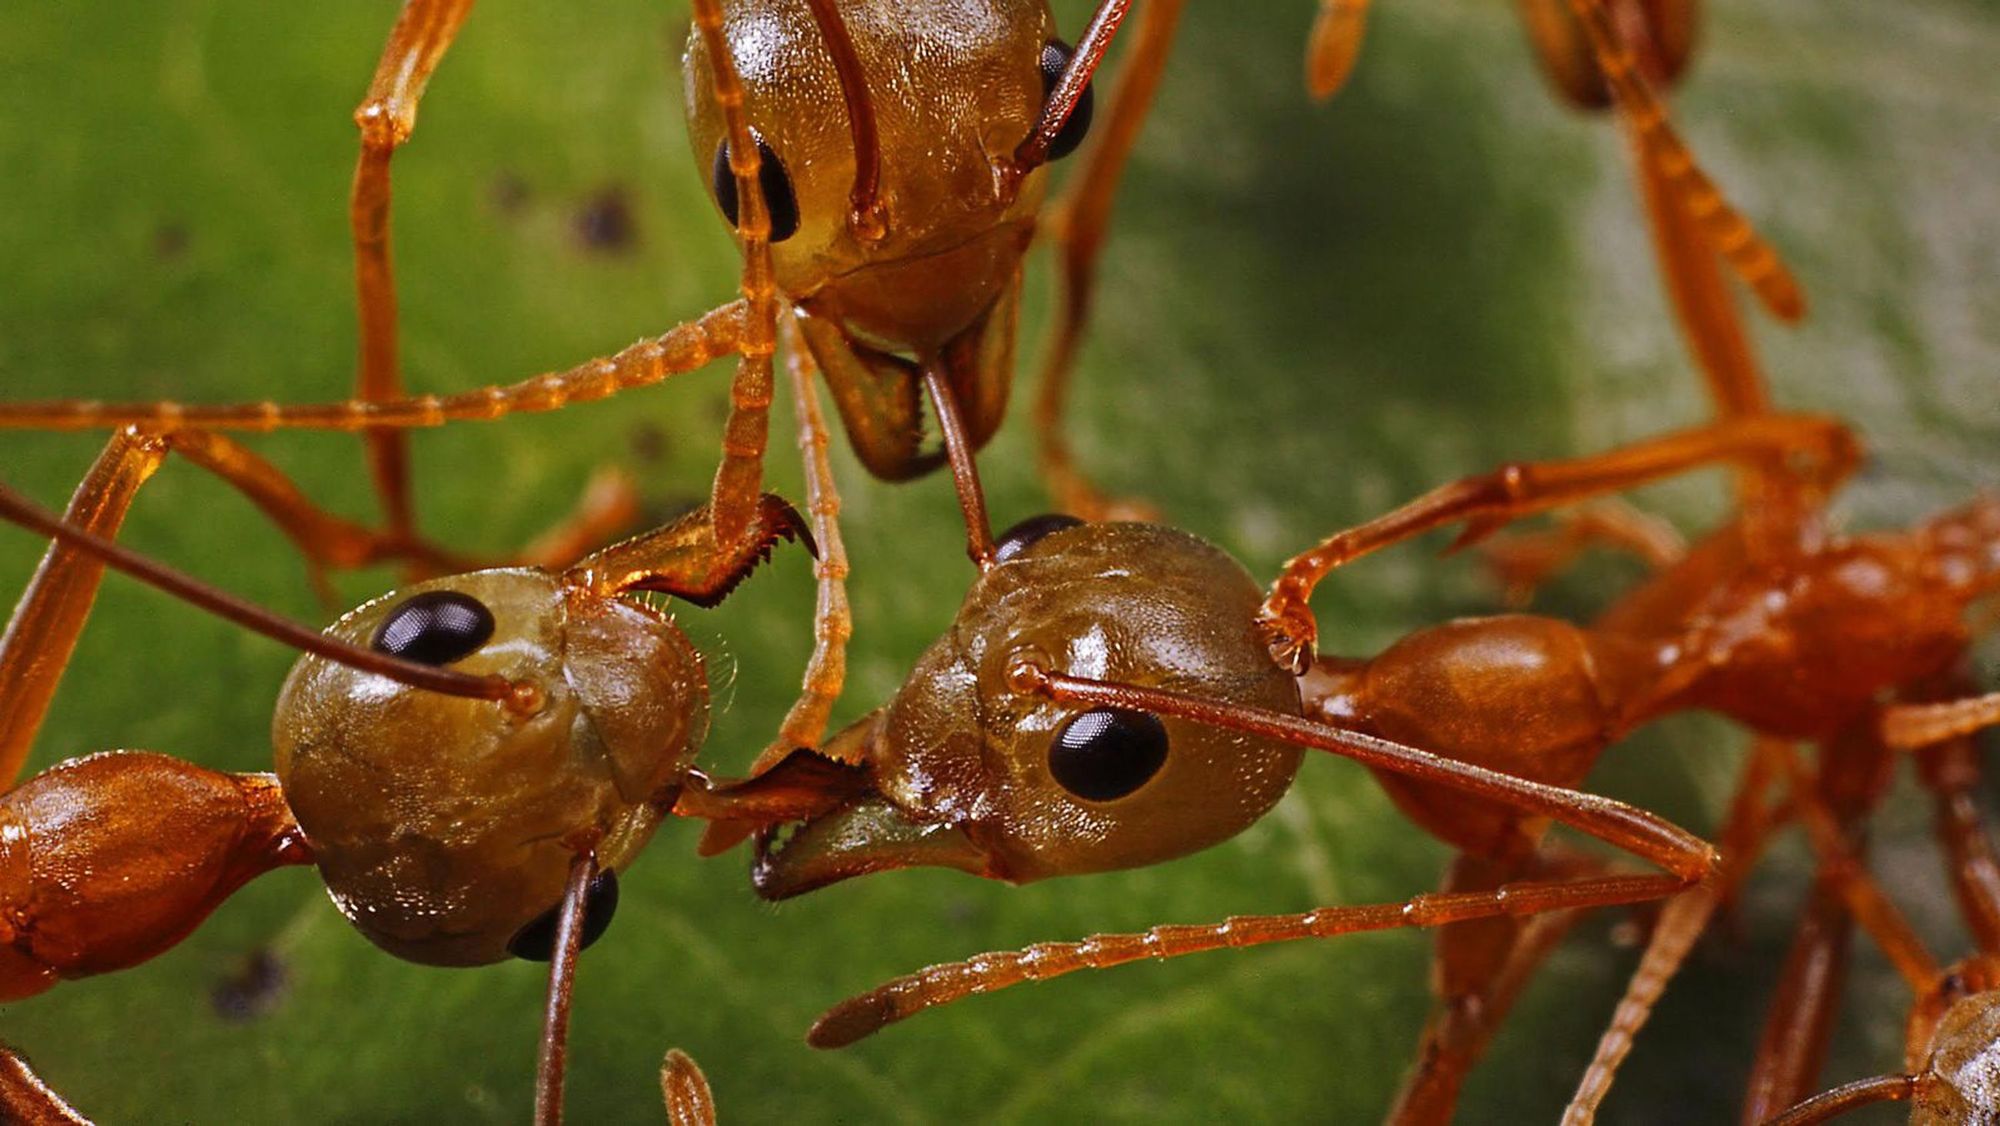 close-up on the heads of a few ants and their antennas